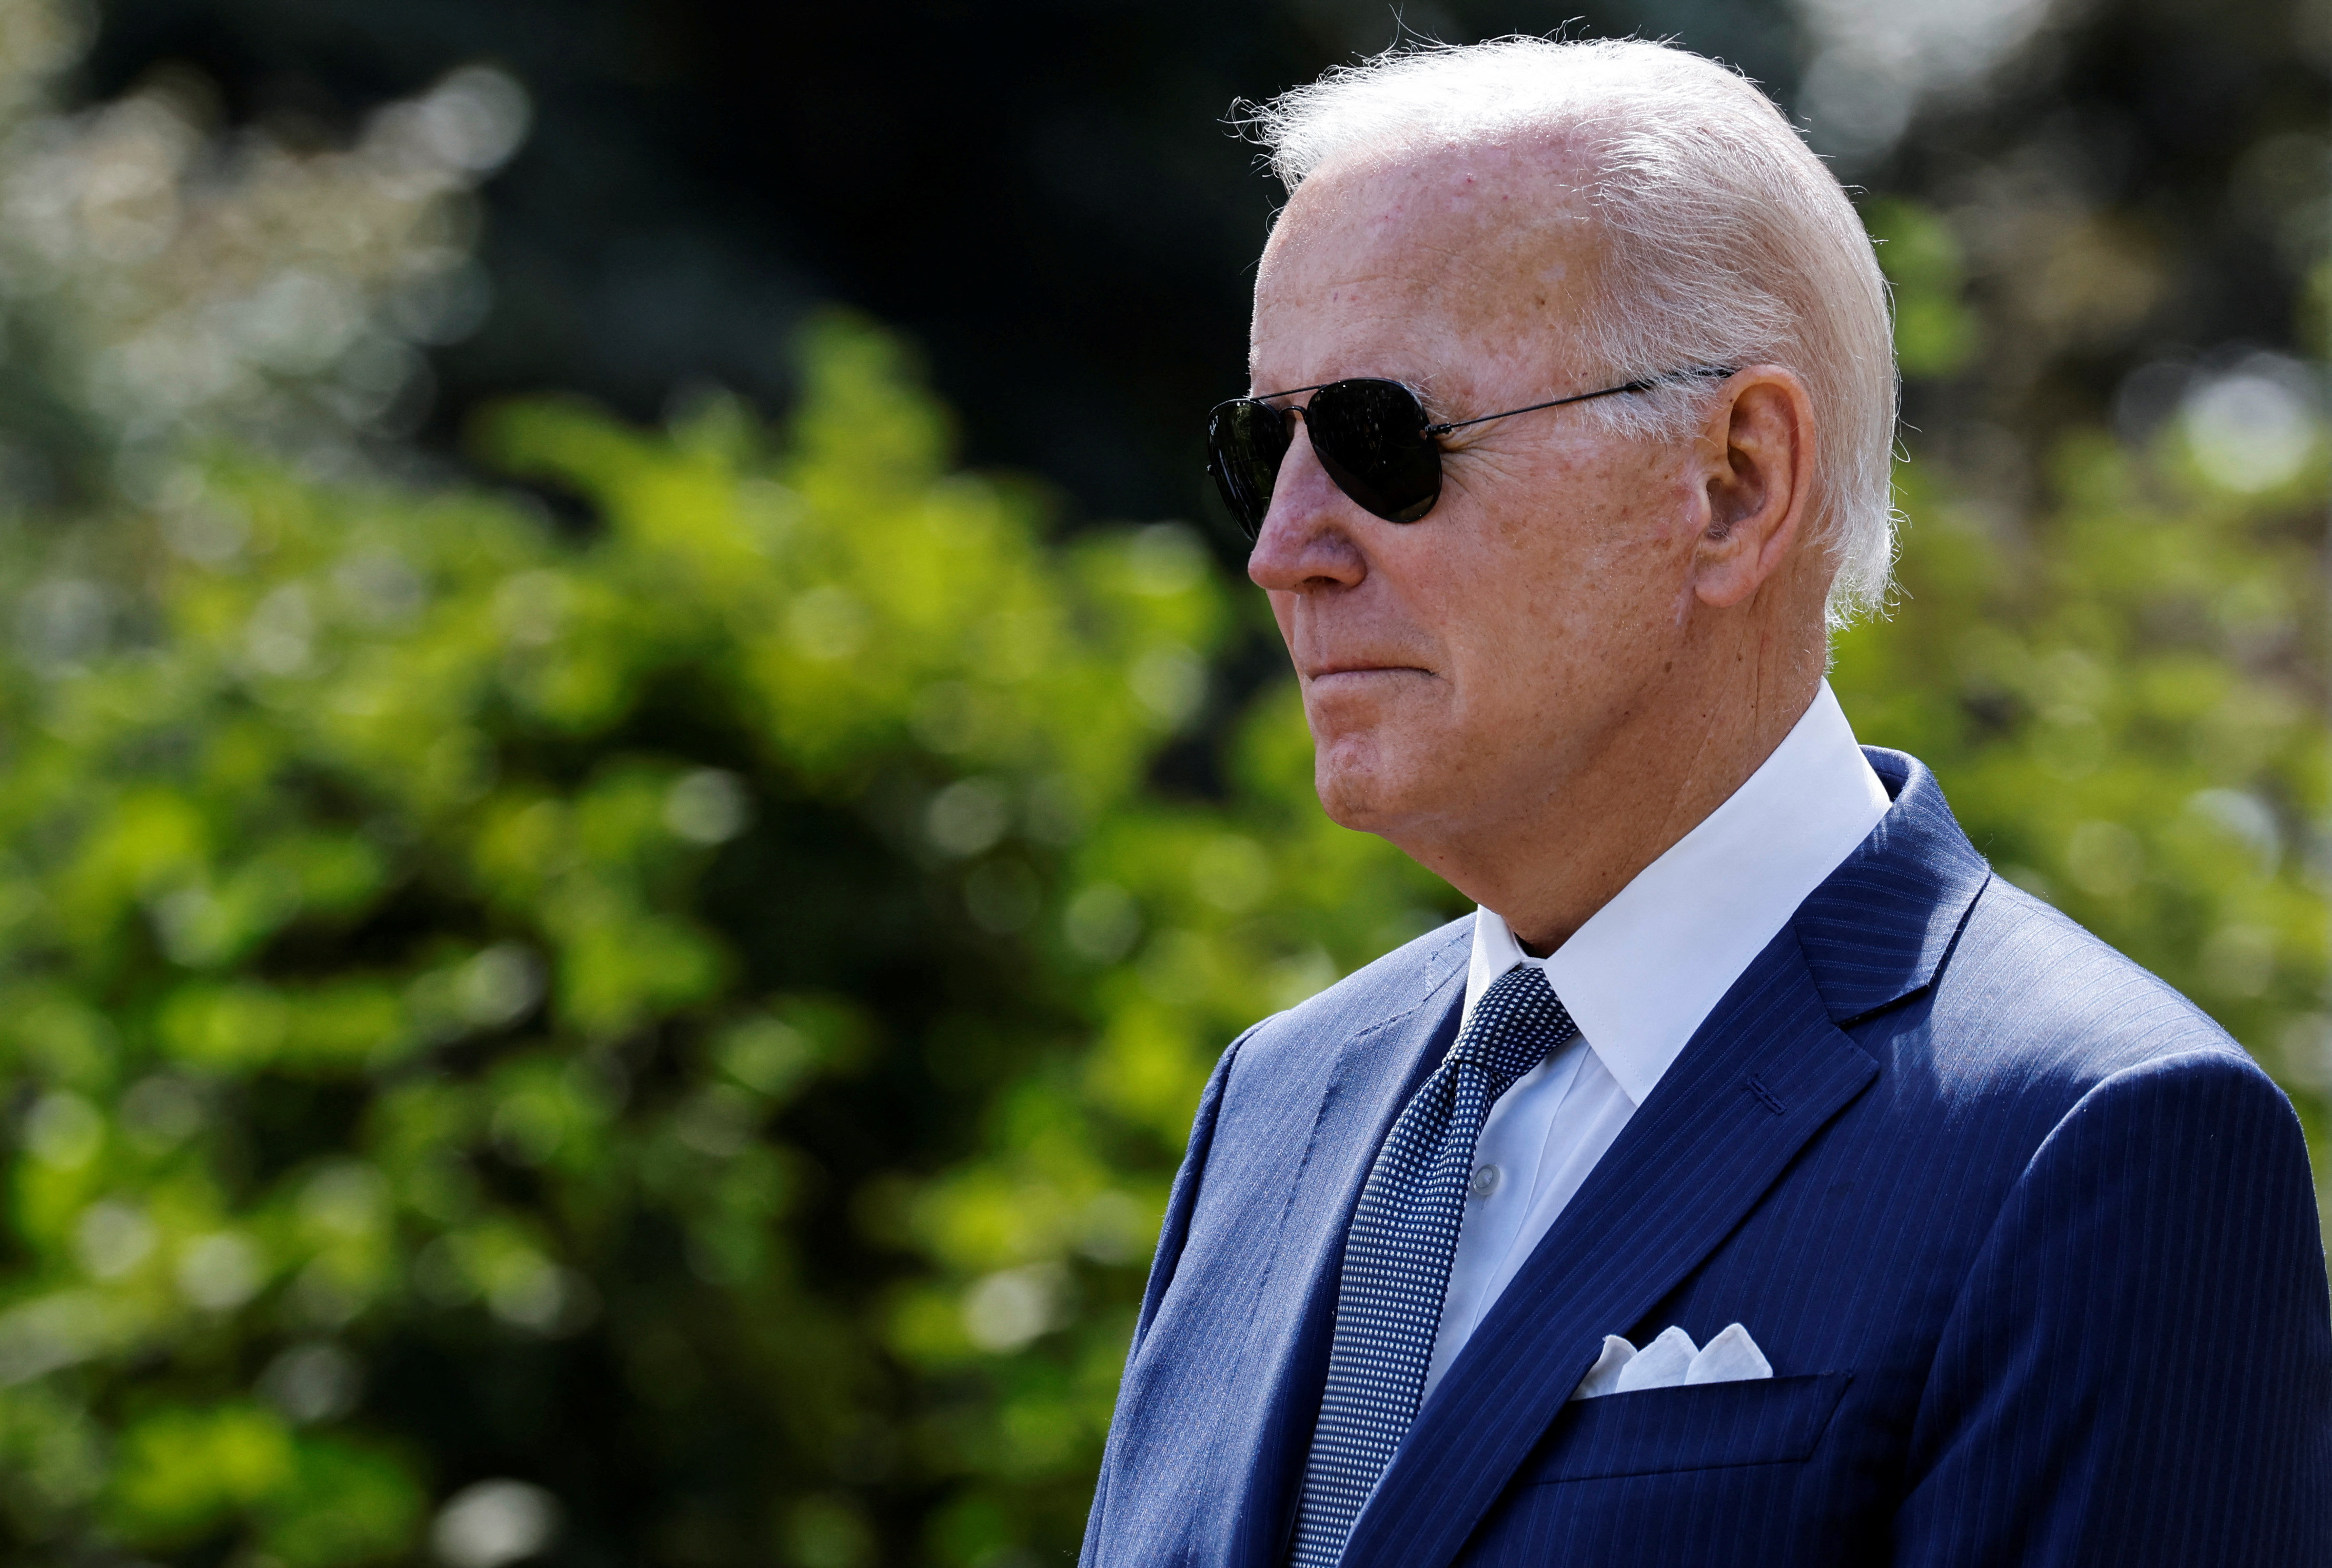 U.S. President Biden hosts event on health care costs, Medicare and Social Security at the White House to Washington